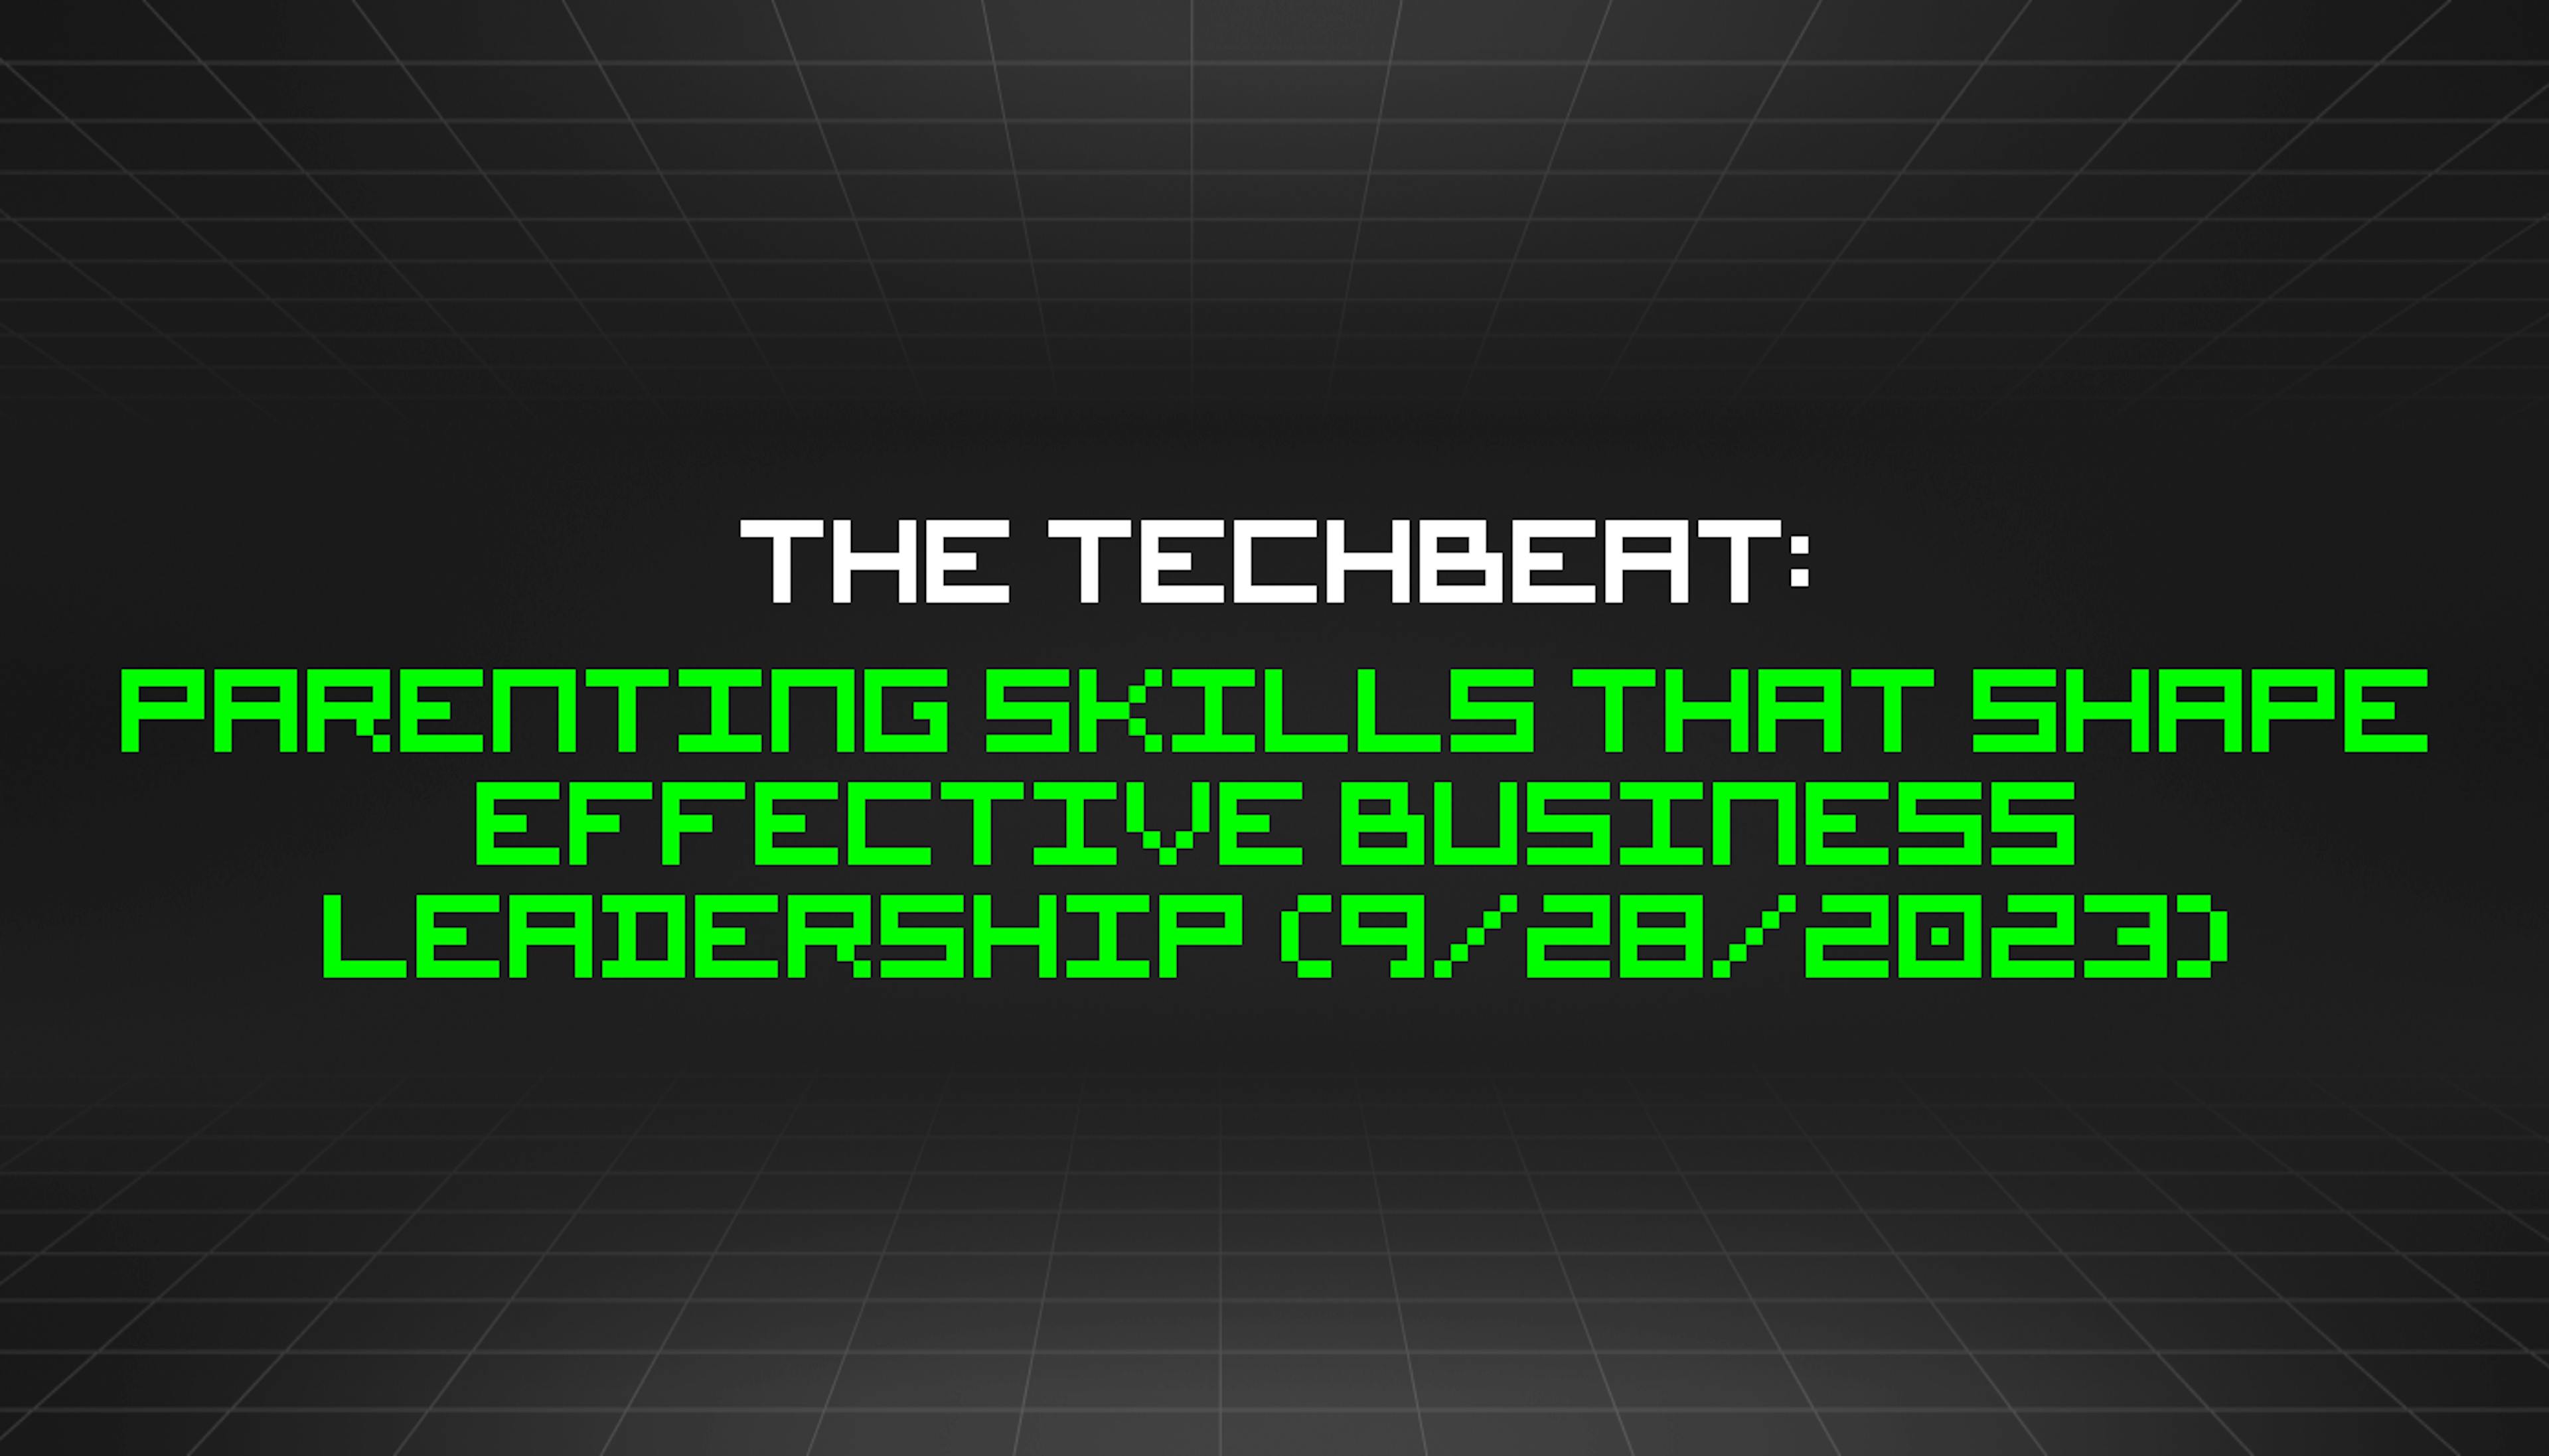 featured image - The TechBeat: Parenting Skills That Shape Effective Business Leadership (9/28/2023)